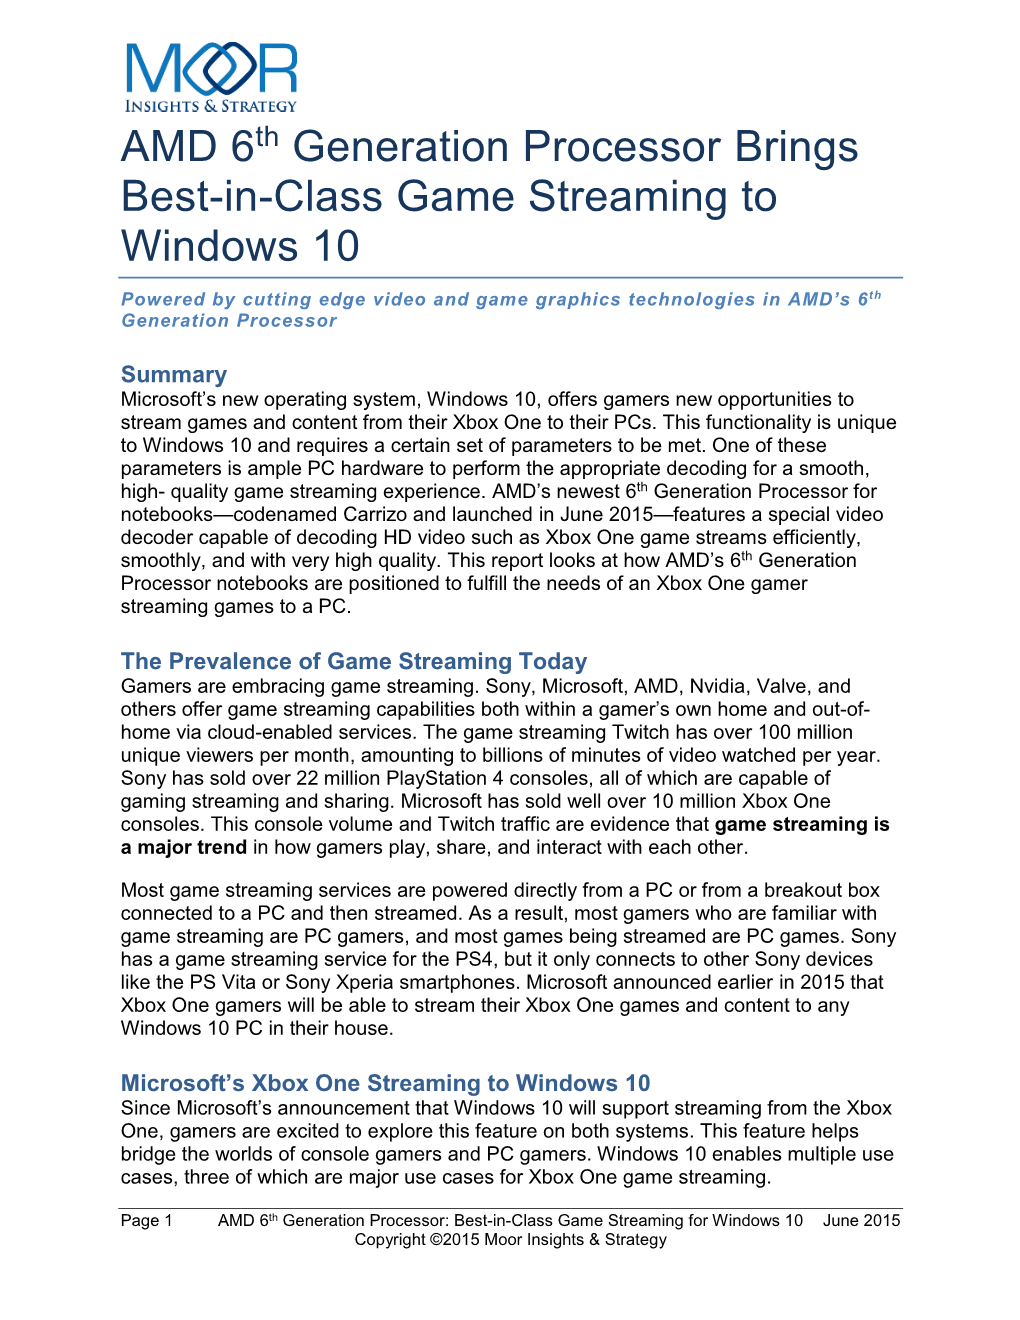 AMD 6Th Generation Processor Brings Best-In-Class Game Streaming to Windows 10